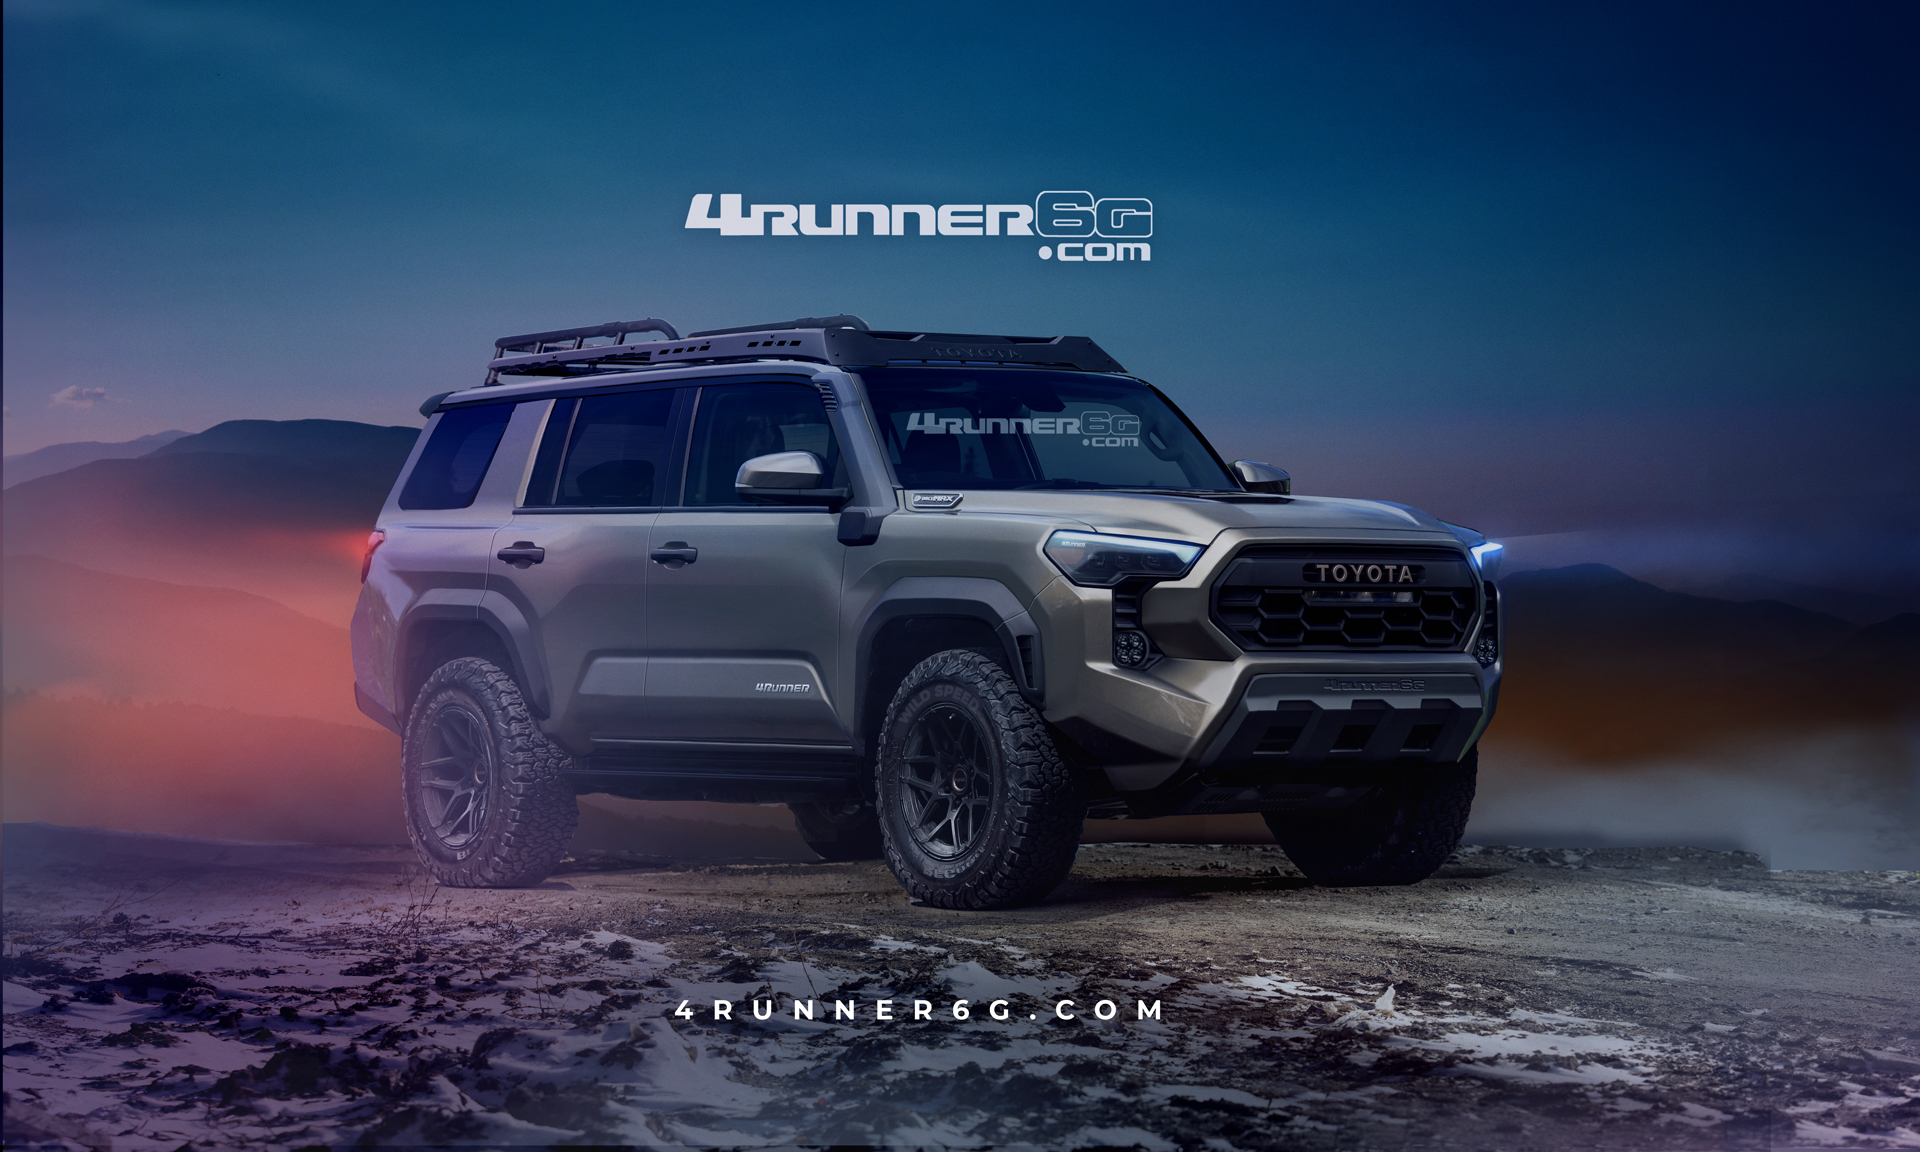 2025 Toyota 4runner 2025 4Runner (6th Gen) News, Specs, Engines, Release Date, Production Date & Preview Renderings -- Insider Info (as of 7/30/23) 2025 Toyota-4Runner-Front-B-oxide